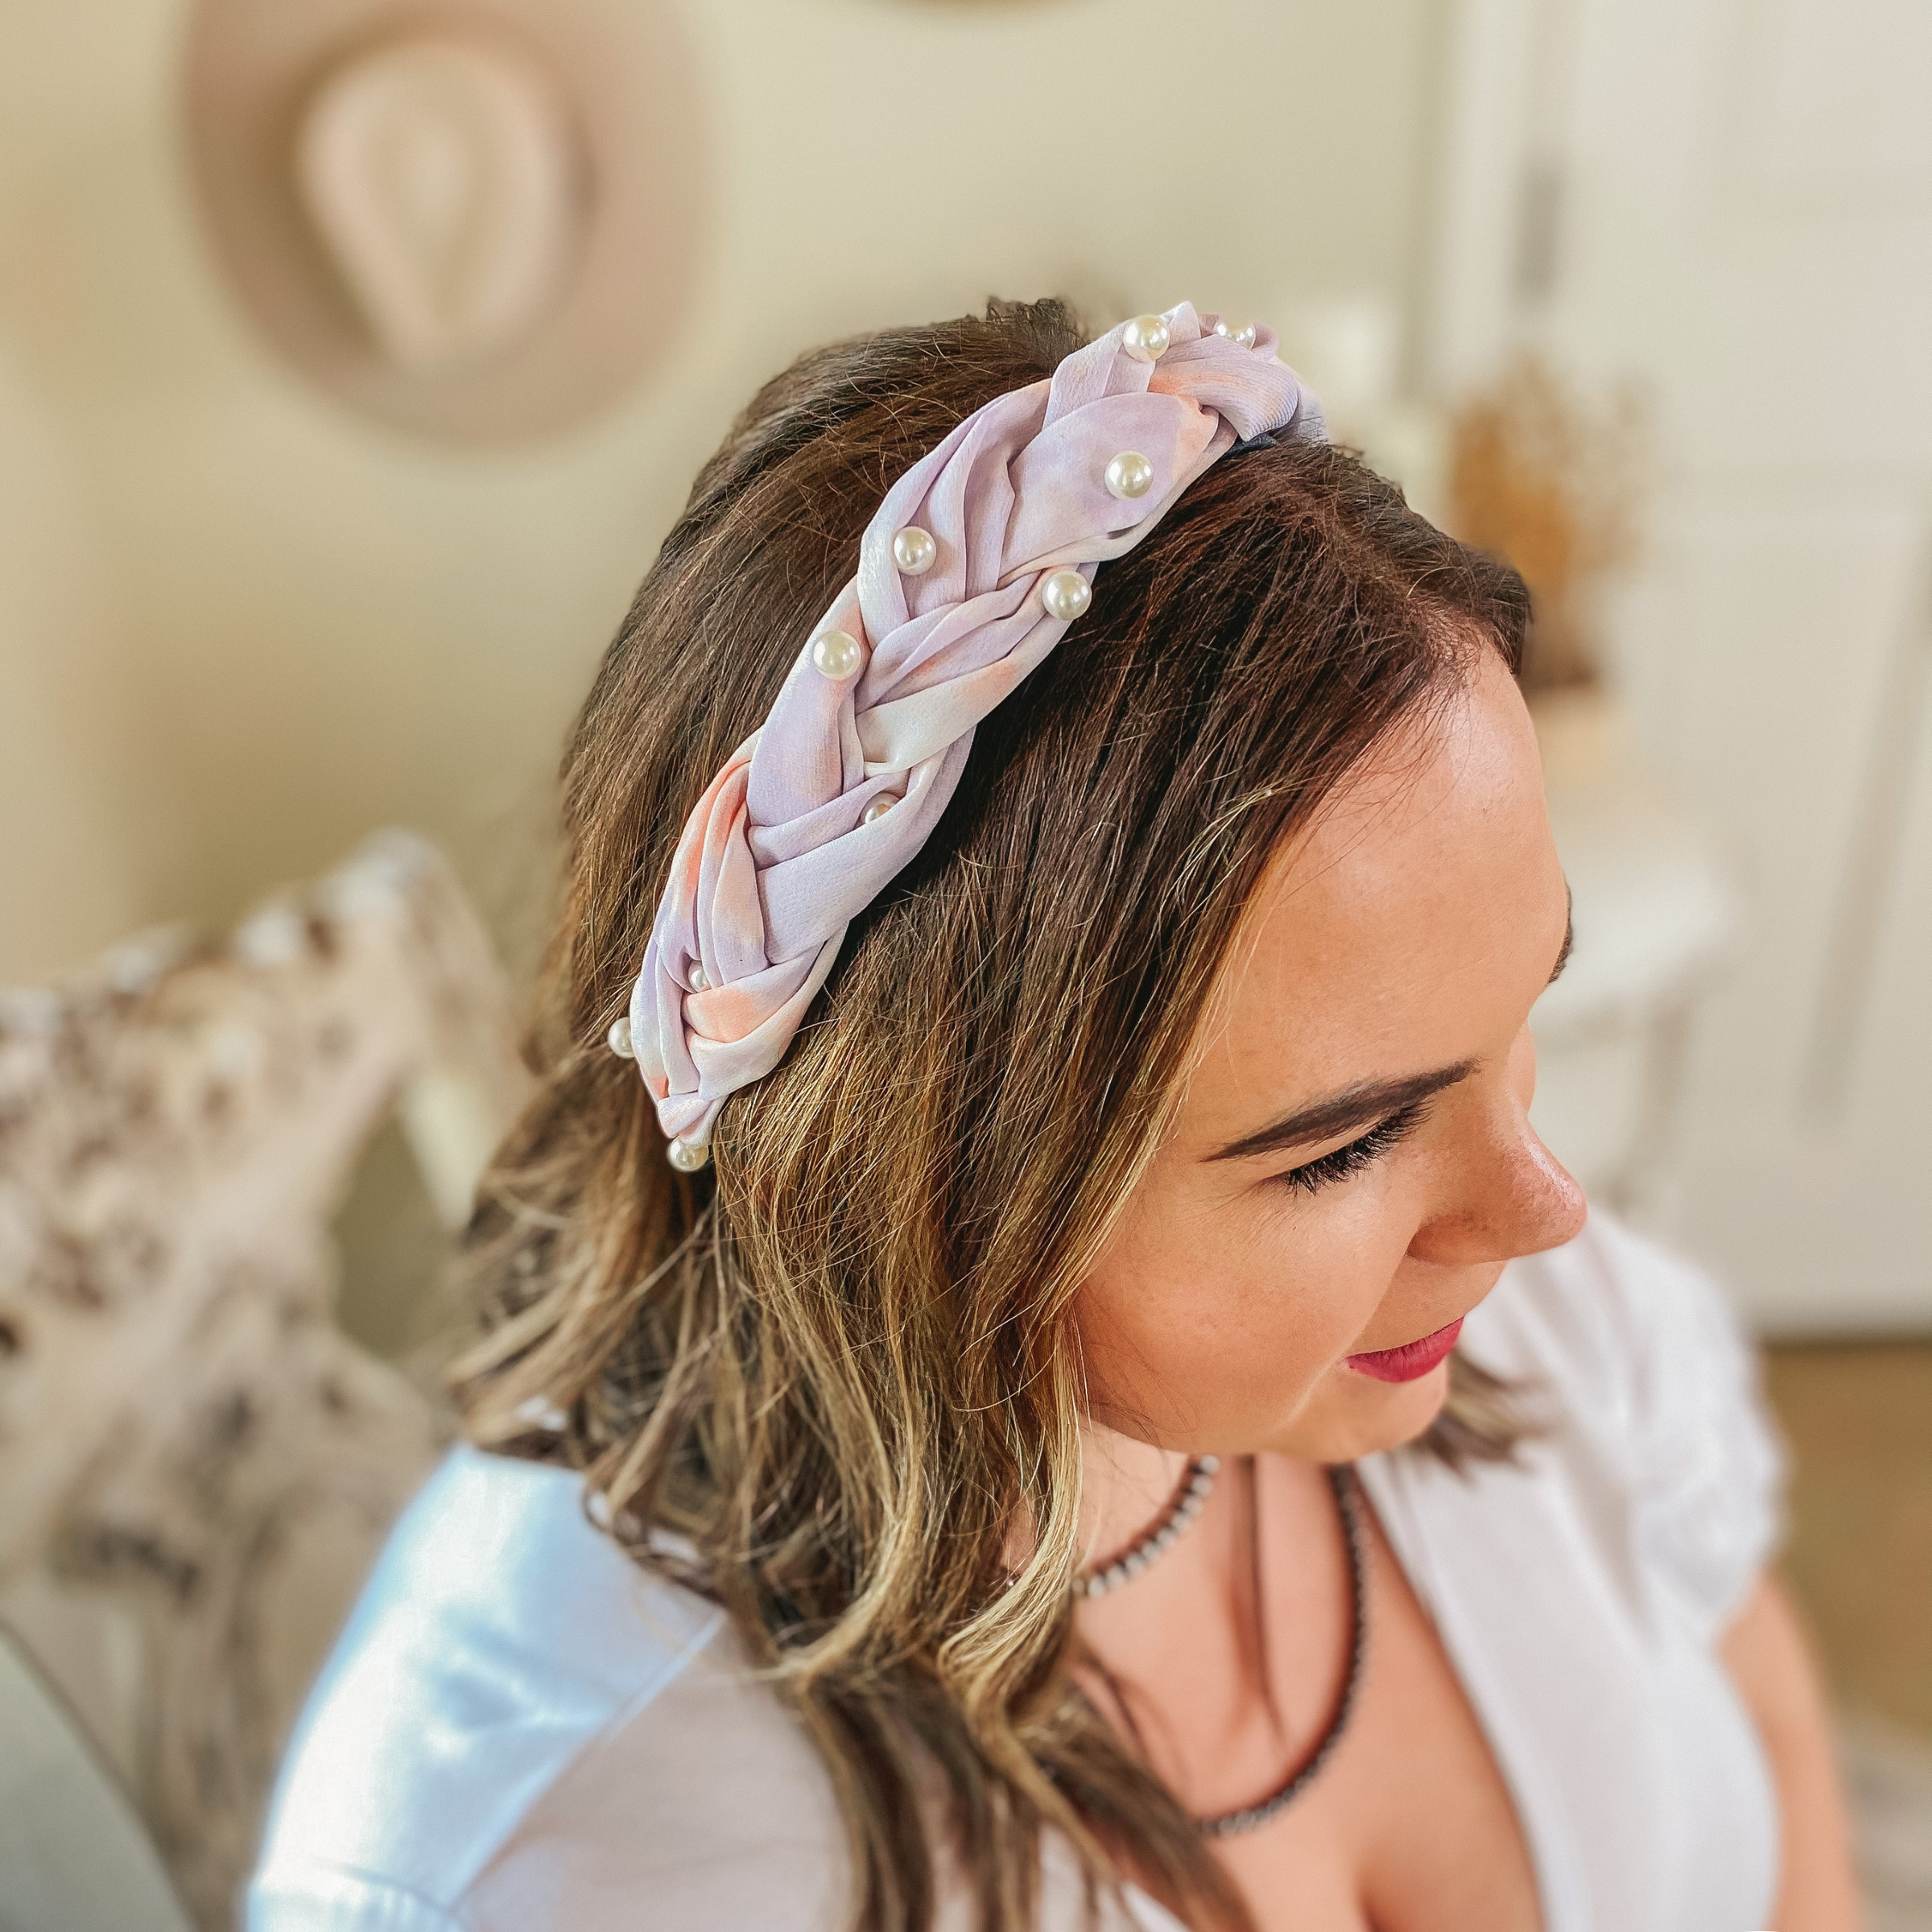 Pearl Detailed Braided Headband in Pink and Lavender Tie Dye - Giddy Up Glamour Boutique